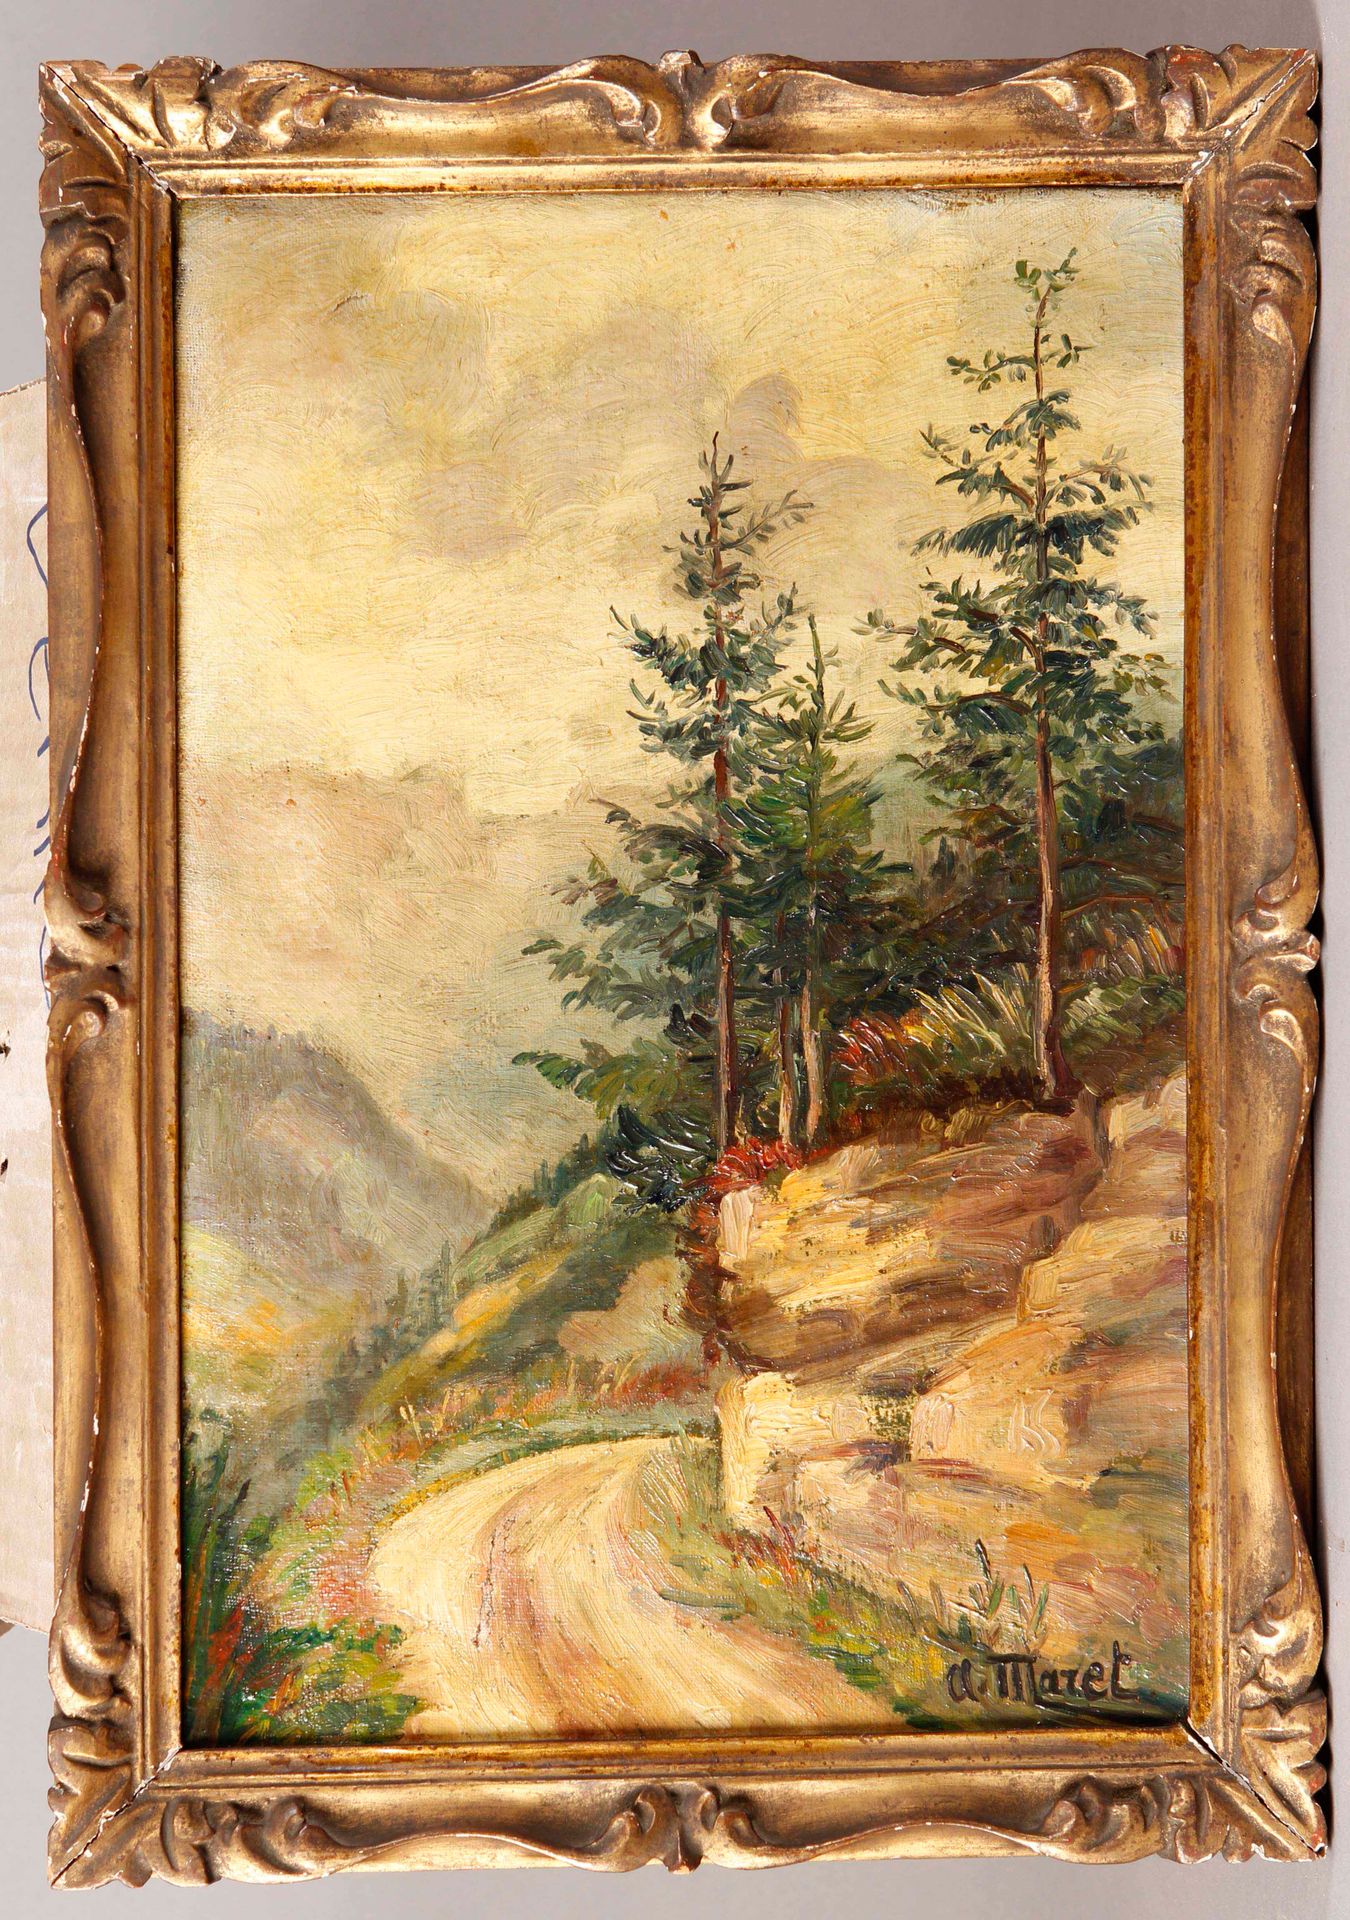 Null A.MARET (XXth century)
Path of the Mountain
Oil on canvas.
41 x 27,5 cm
Sma&hellip;